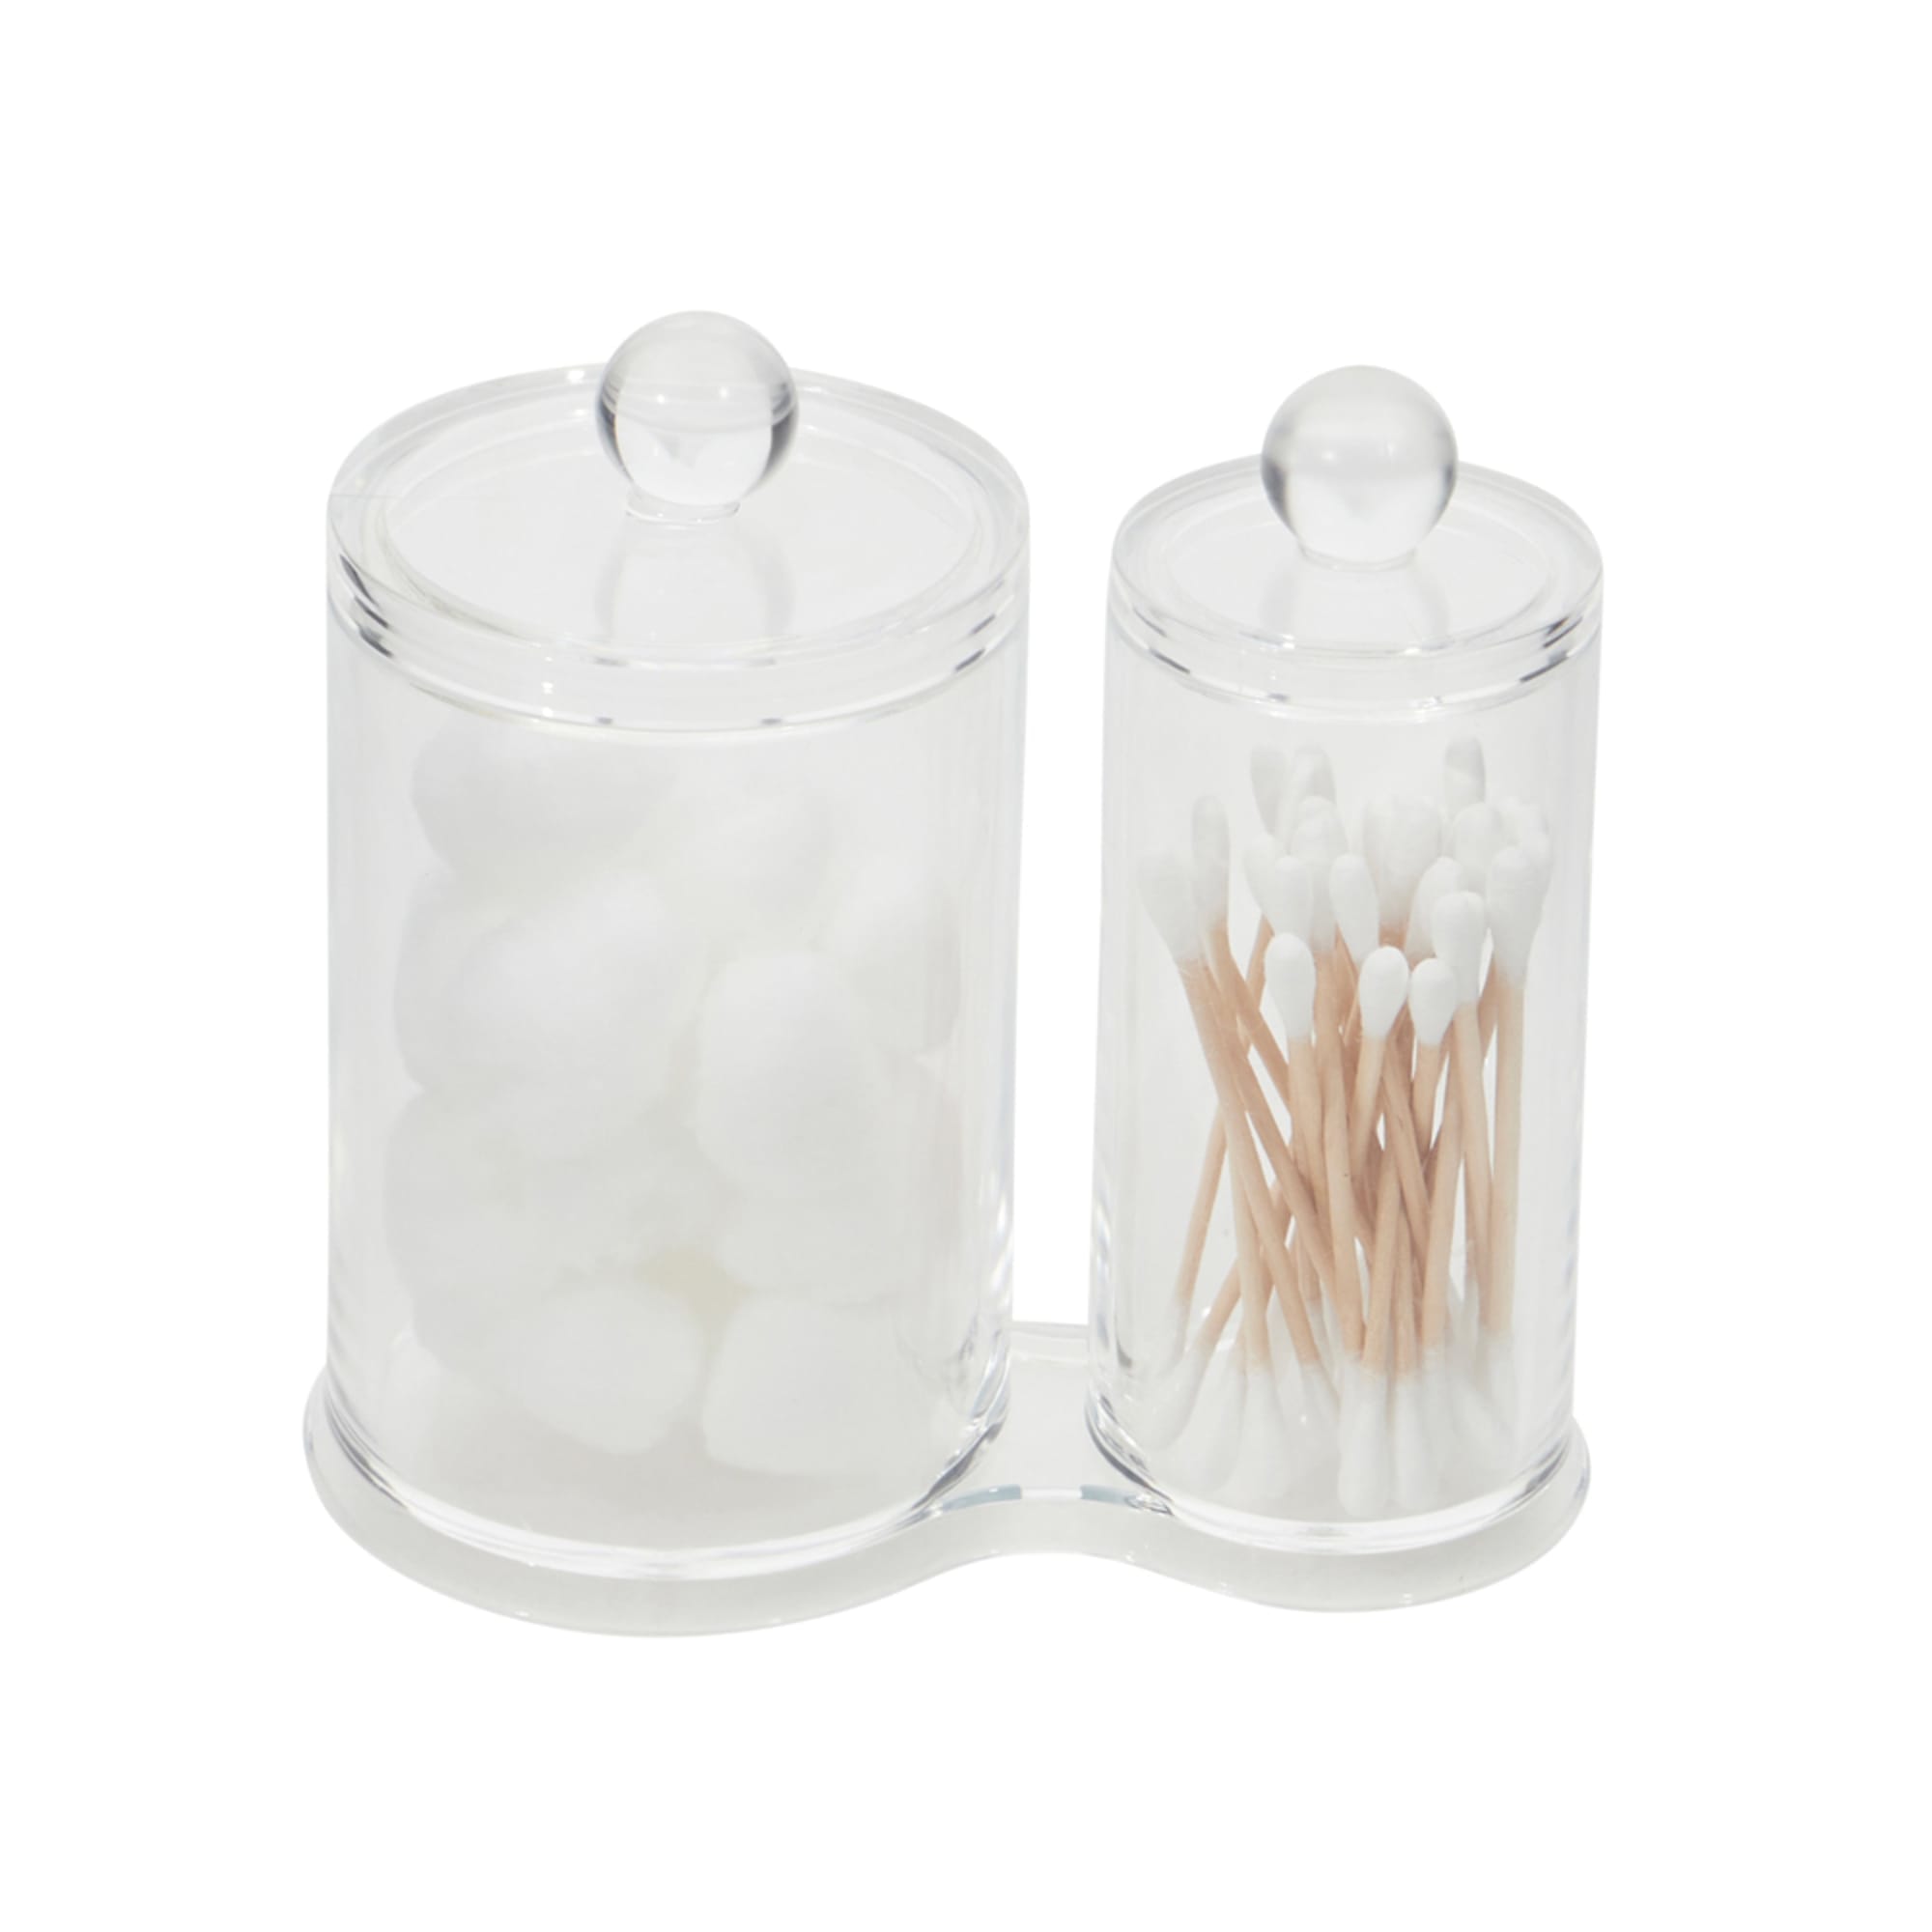 Home Basics Cotton Ball, Pad and Swab Holder $3.00 EACH, CASE PACK OF 12